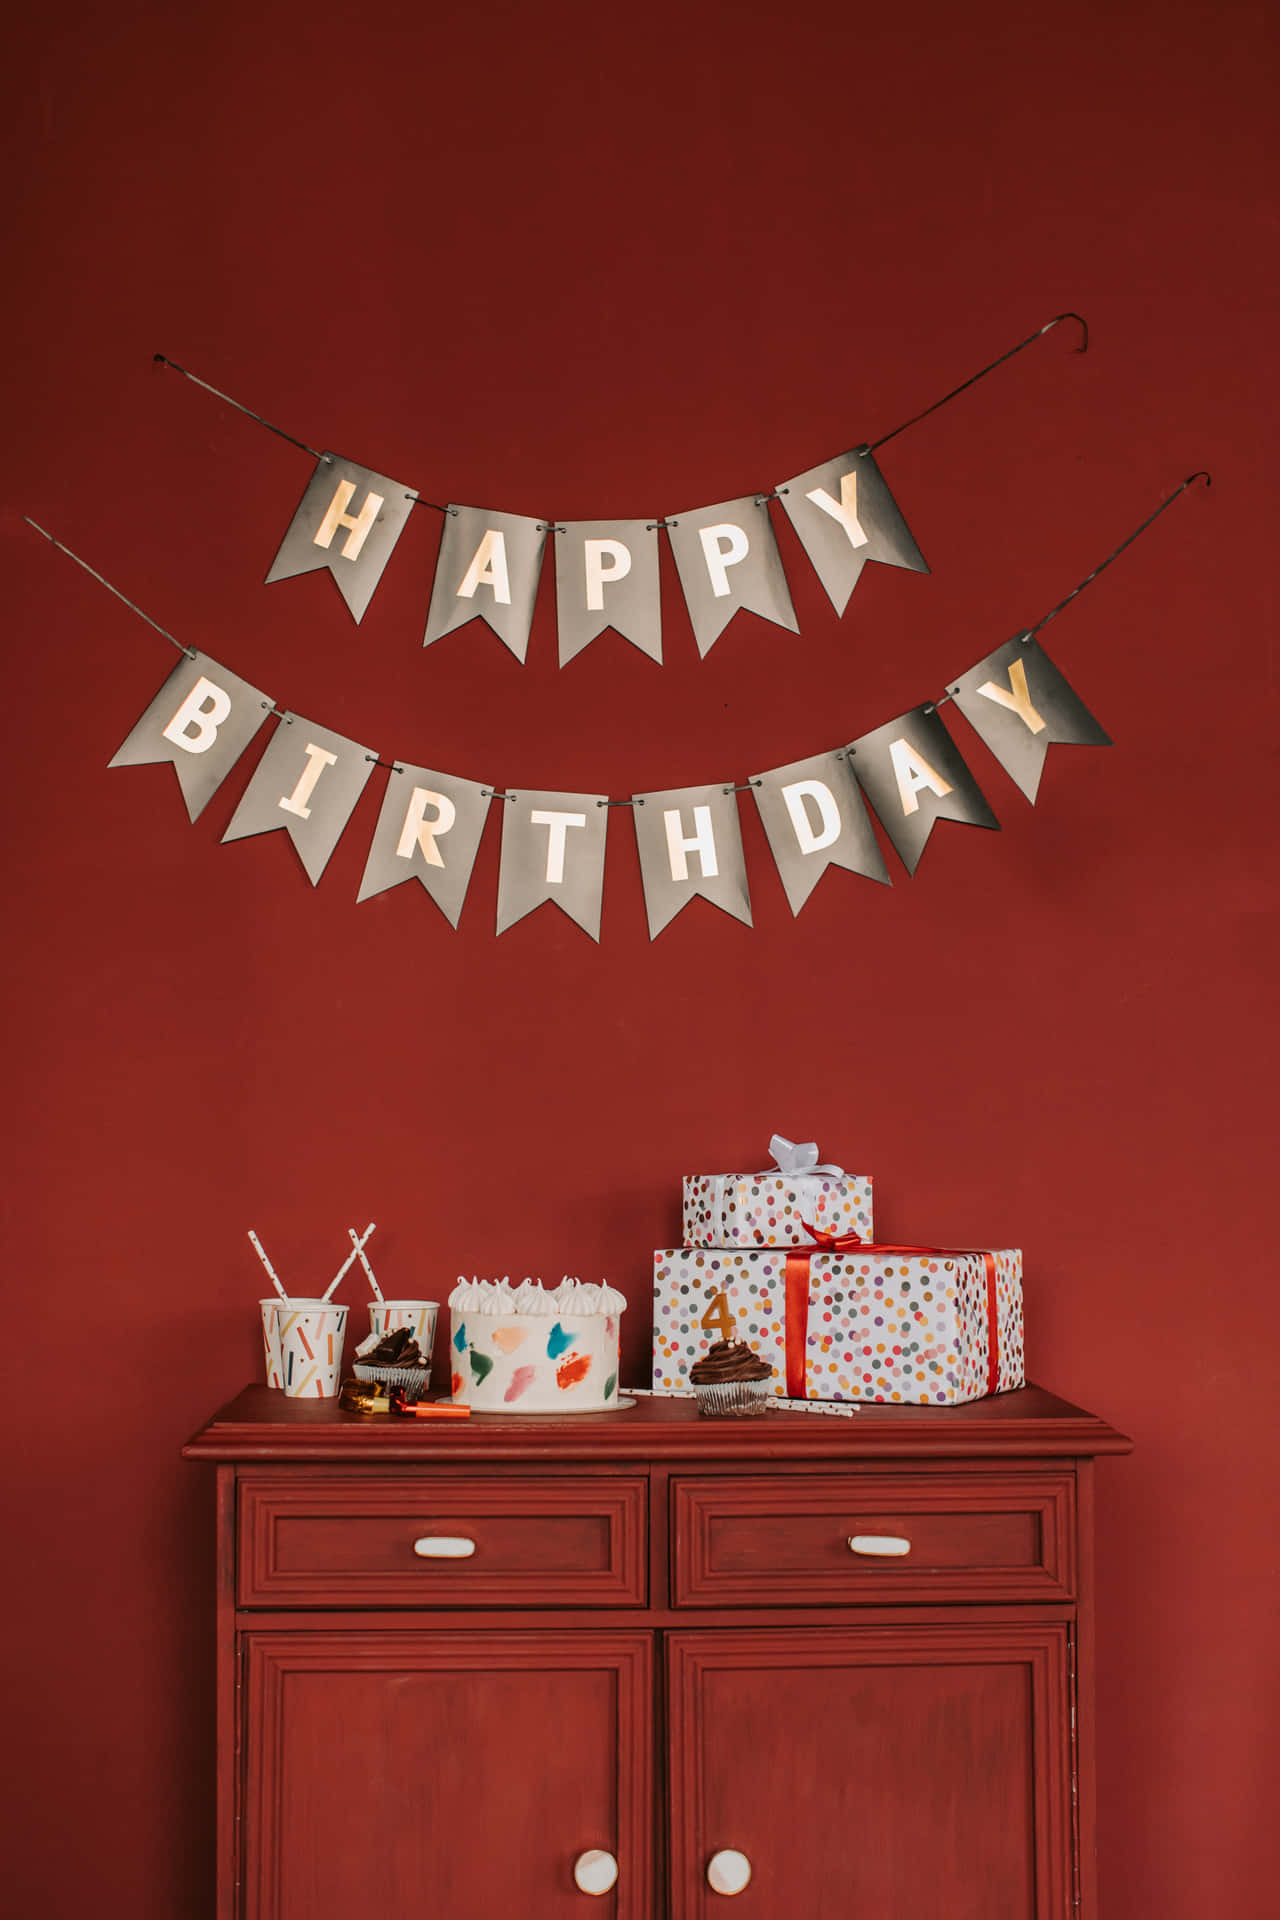 Celebrate With Adorable Birthday Wishes! Background